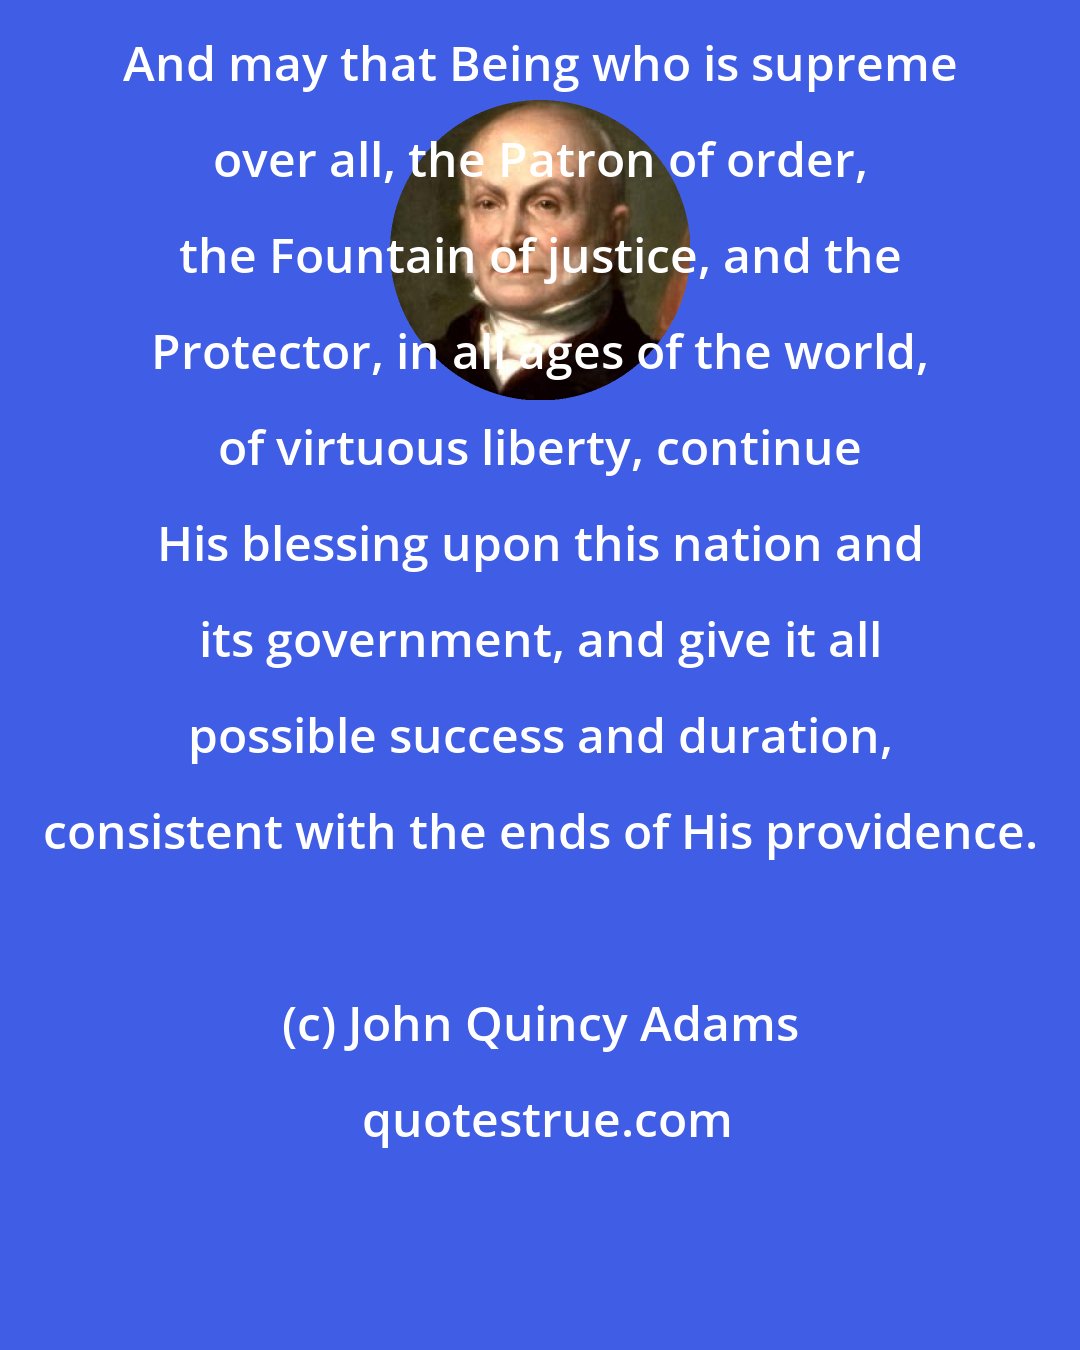 John Quincy Adams: And may that Being who is supreme over all, the Patron of order, the Fountain of justice, and the Protector, in all ages of the world, of virtuous liberty, continue His blessing upon this nation and its government, and give it all possible success and duration, consistent with the ends of His providence.